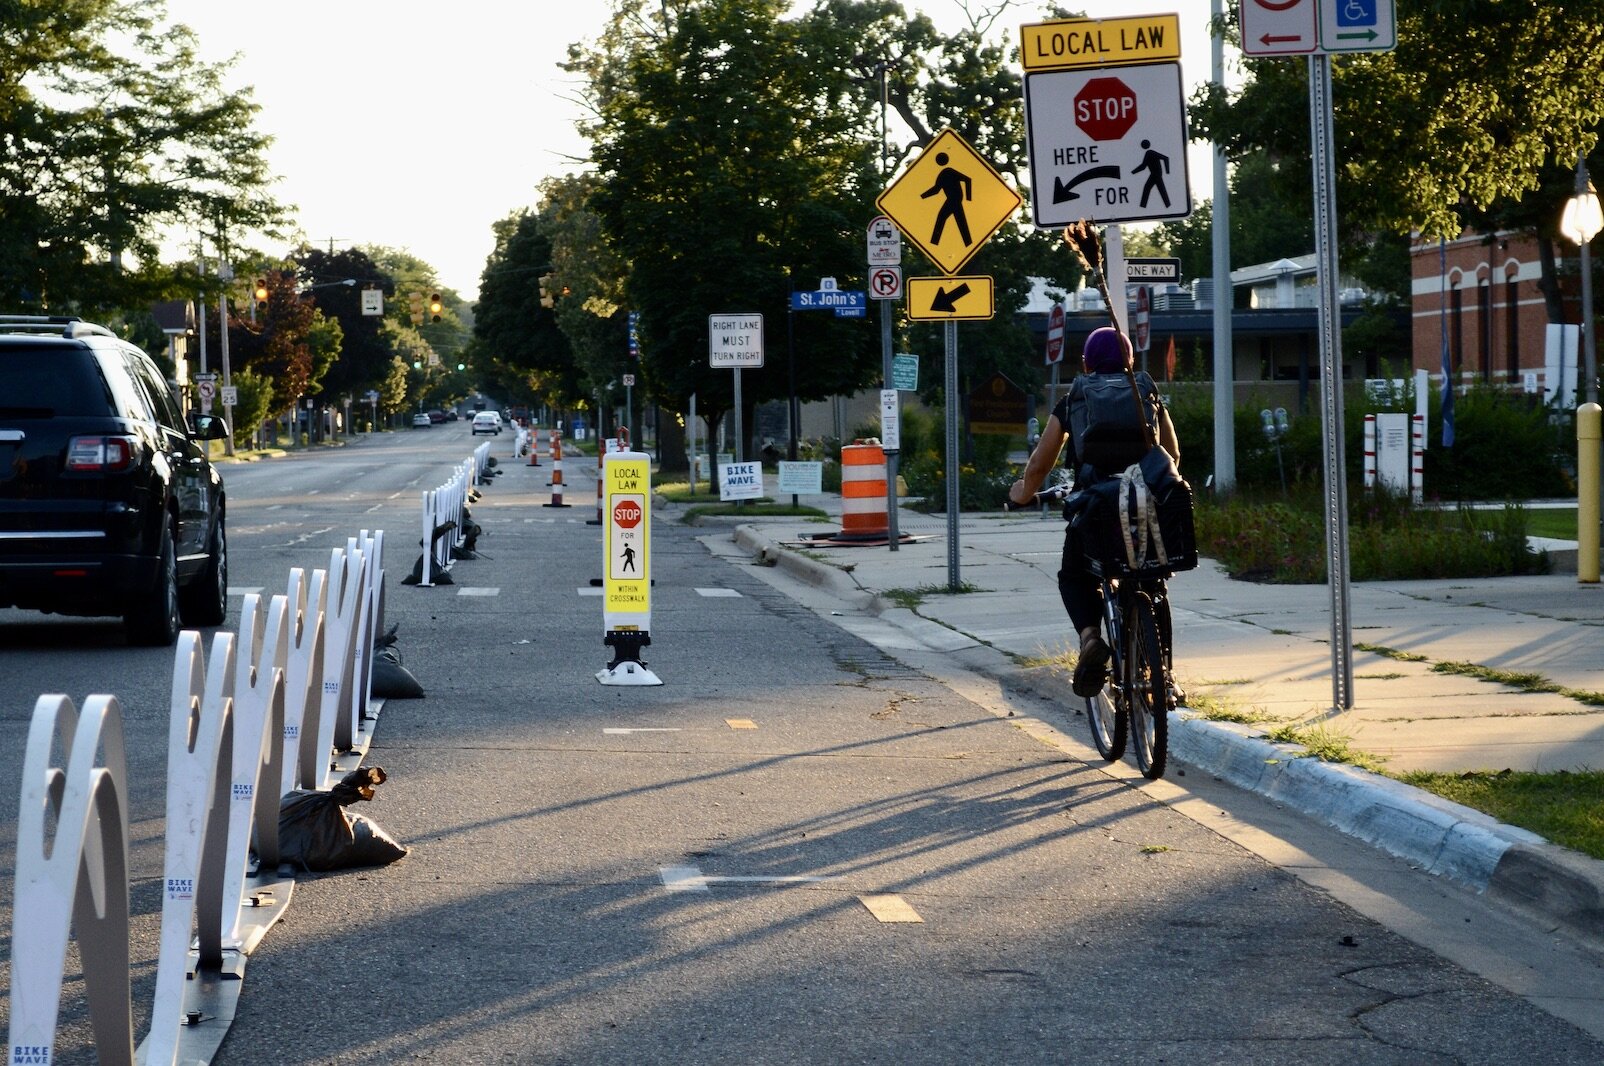 A survey from ModeShift showed a positive response from both bikers and drivers. Bikes used the lane around 2,500 times per month.